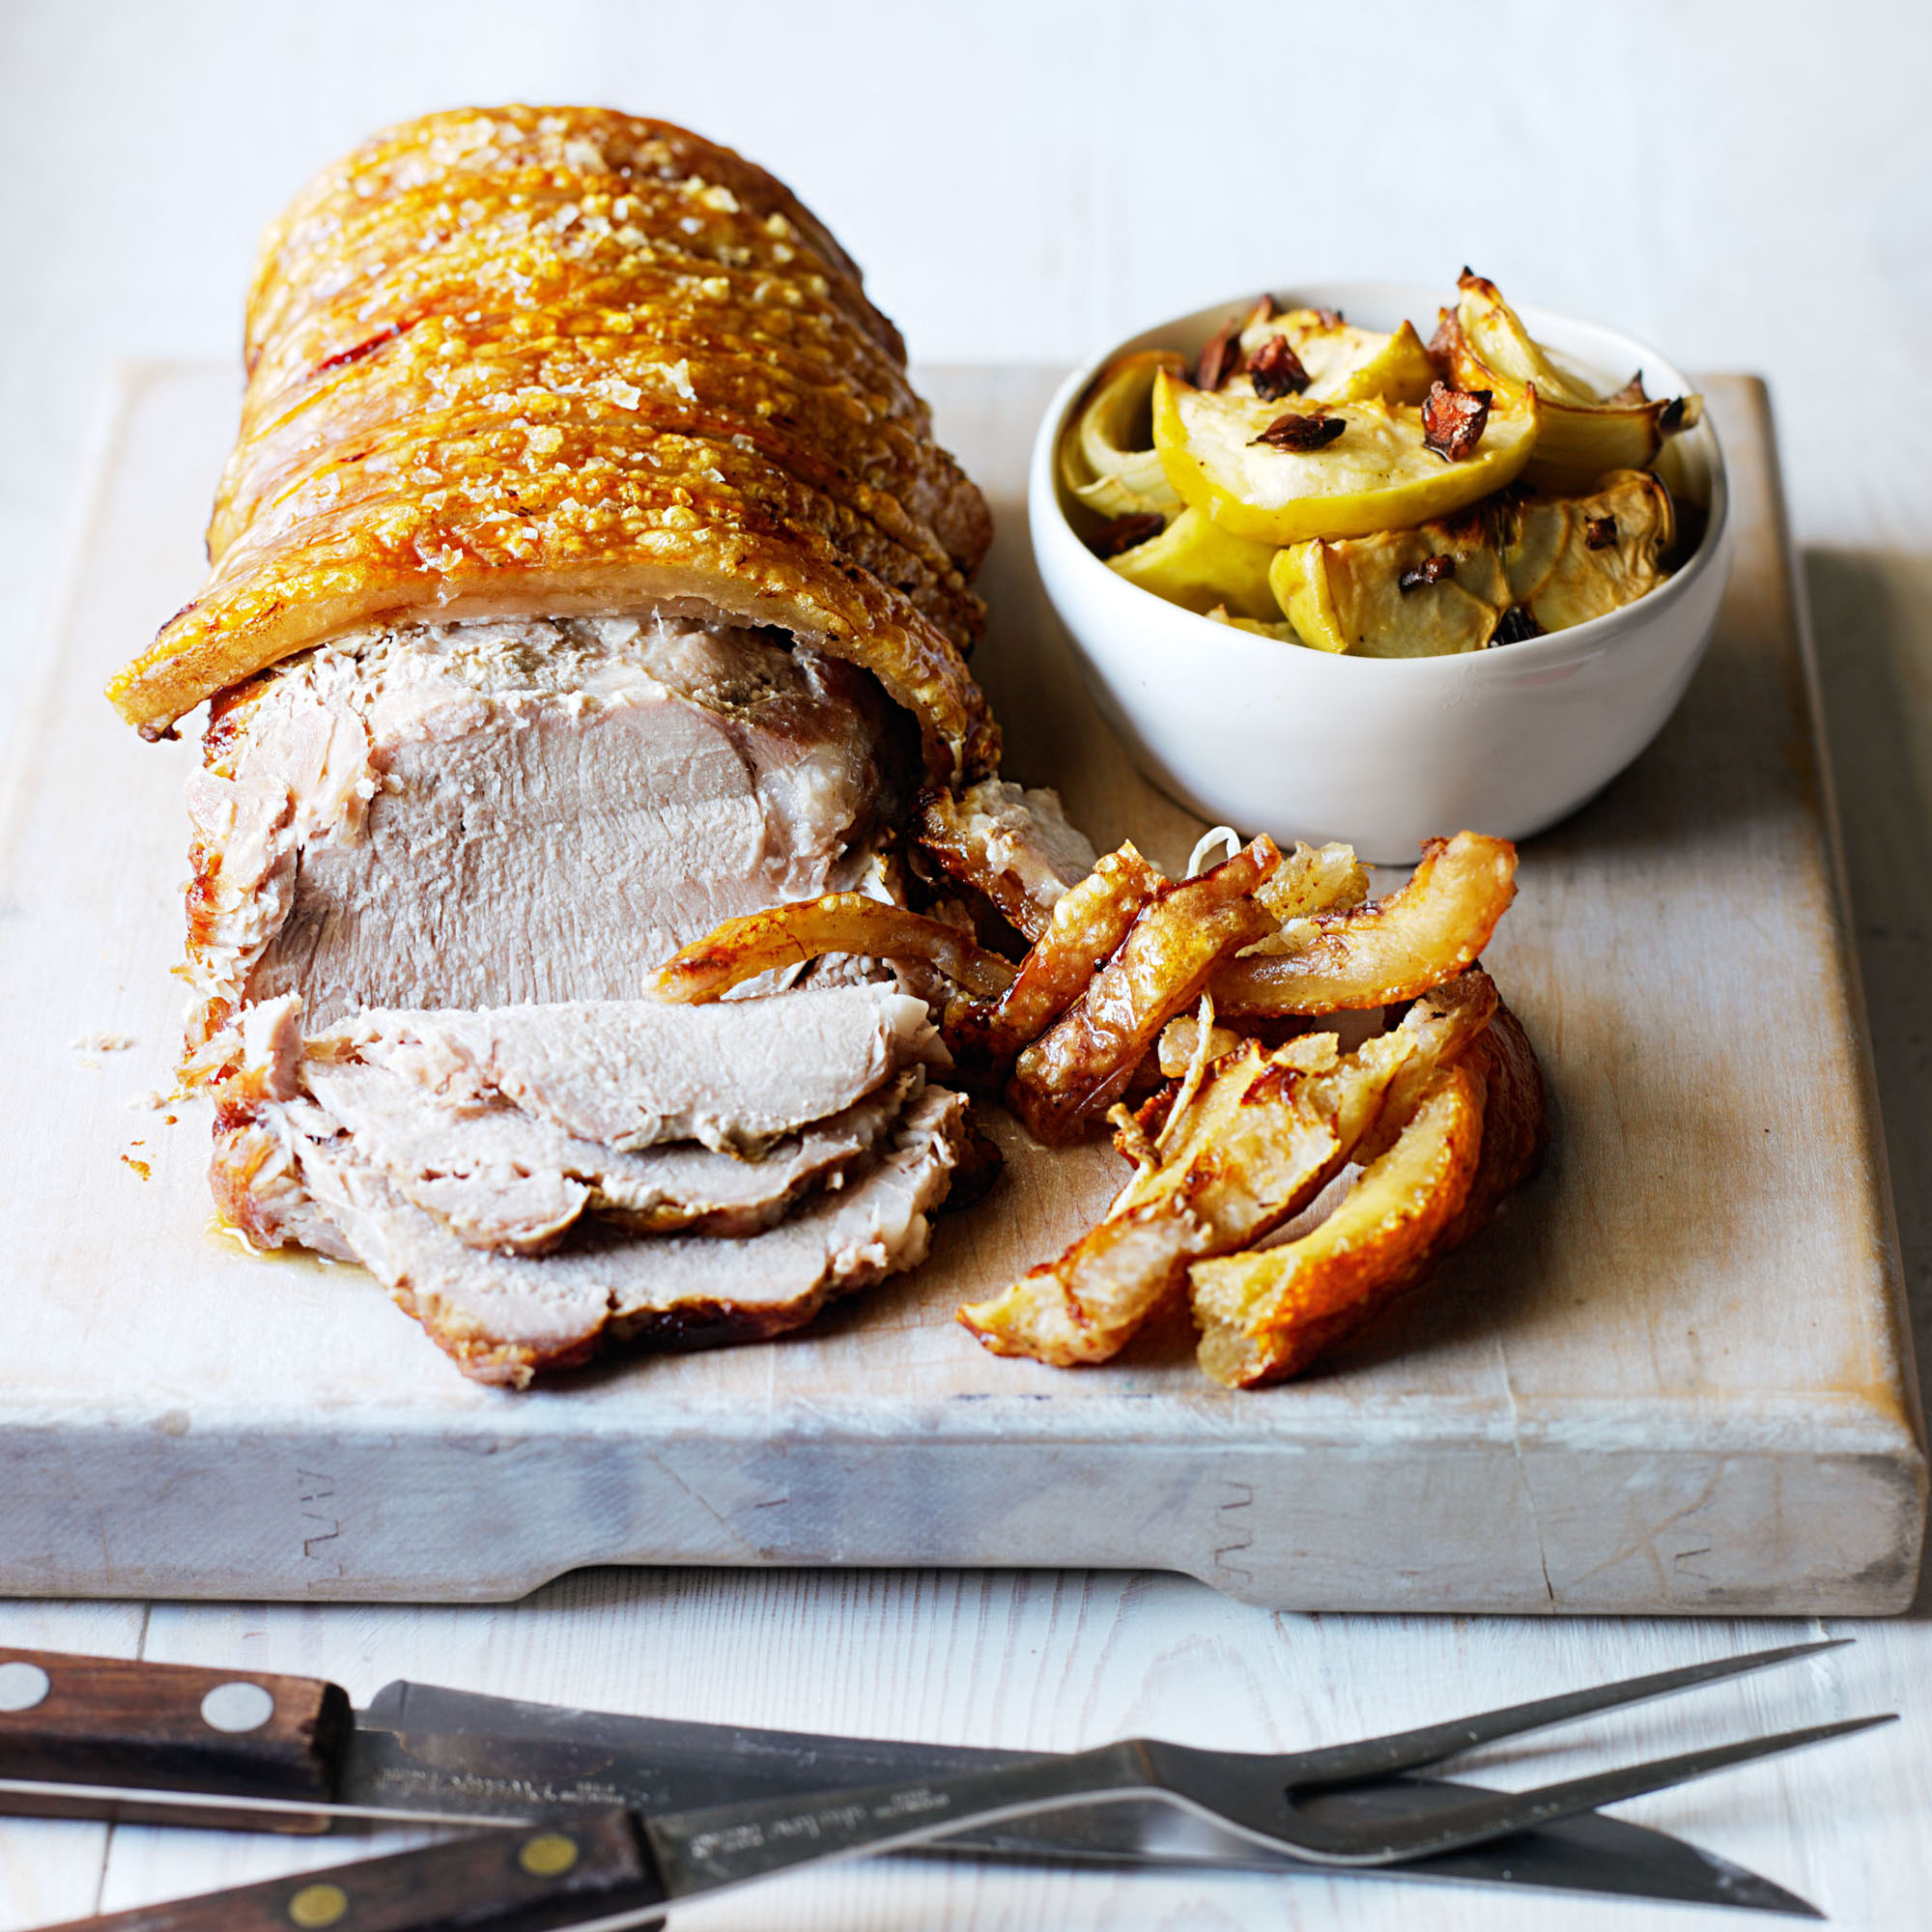 Roasted pork loin with baked apple and onion chutney recipe